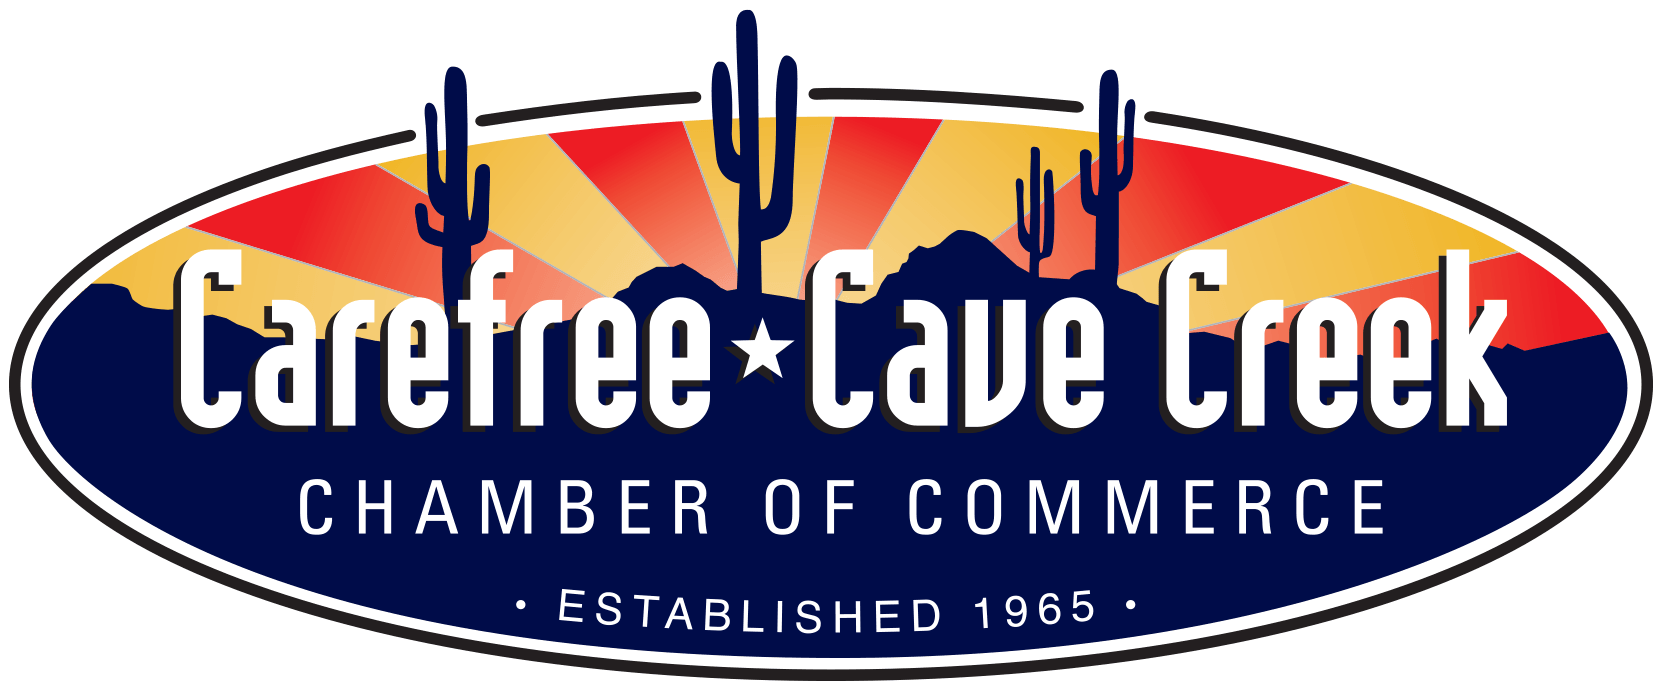 Carefree/Cave Creek Chamber of Commerce